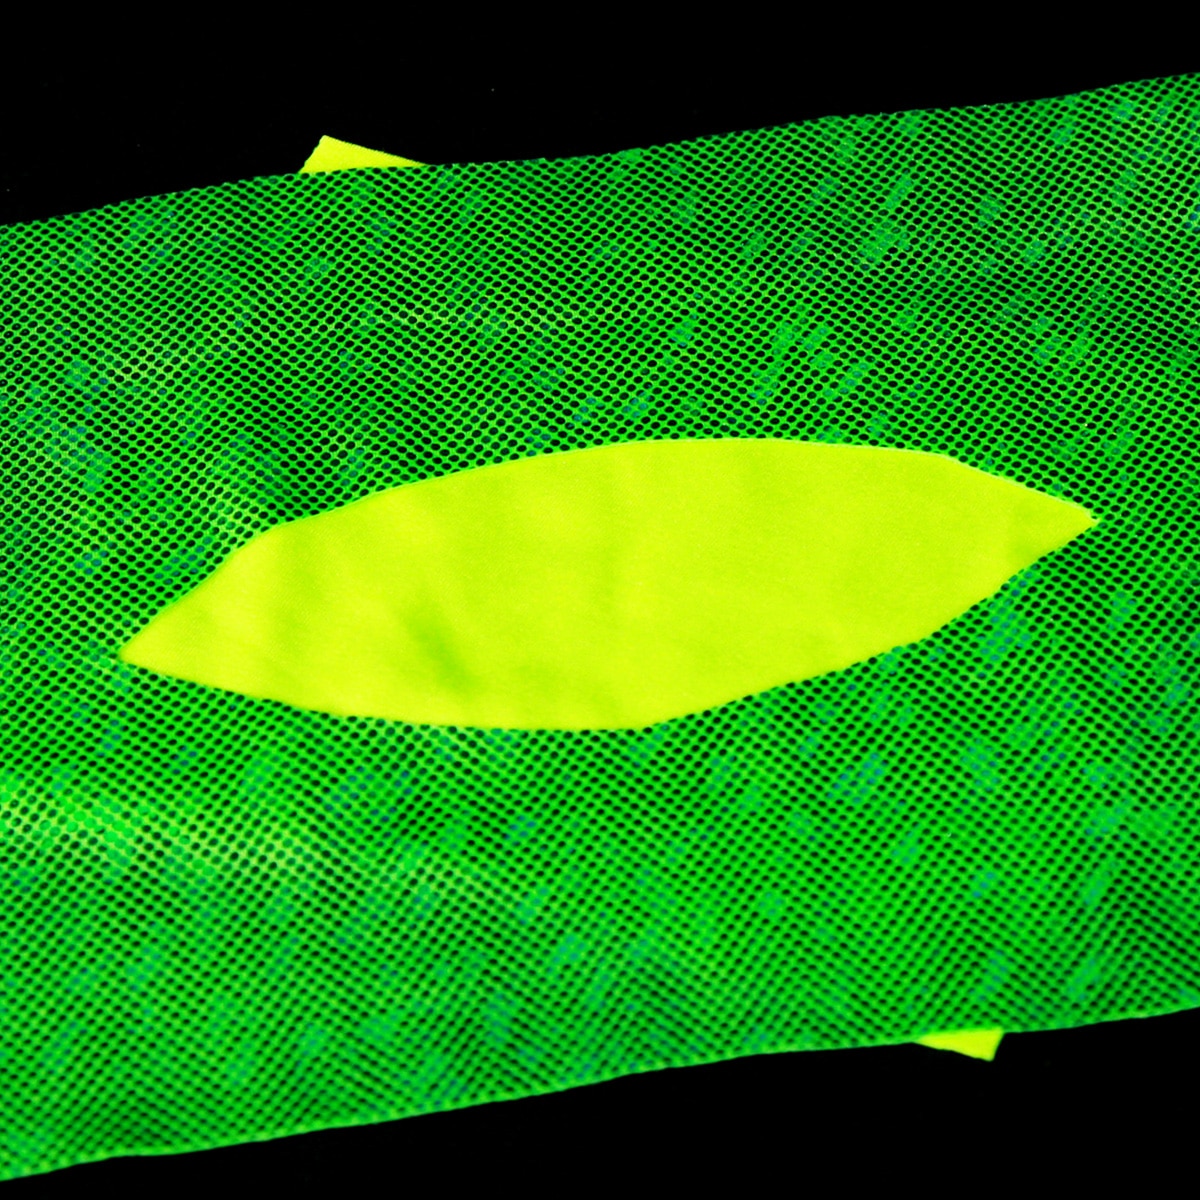 A rectangle of sparkly bright green spandex has a hole cut out of it, with yellow spandex showing from underneath.